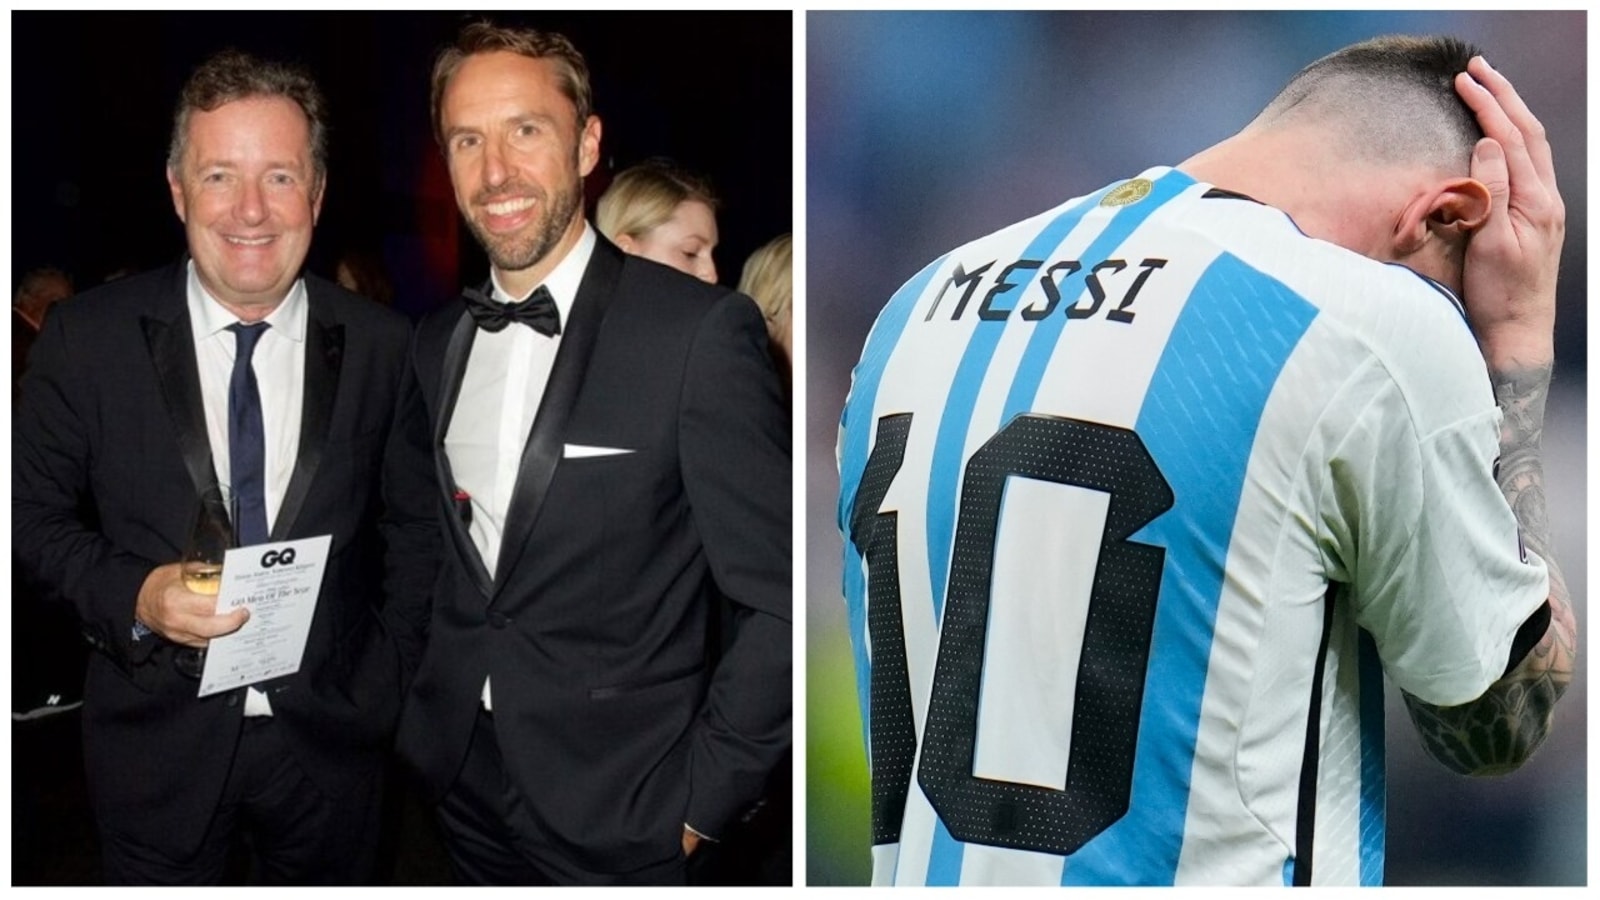 ‘Mbappe will score twice and Messi will cry’: Piers Morgan makes bombshell prediction for FIFA World Cup final